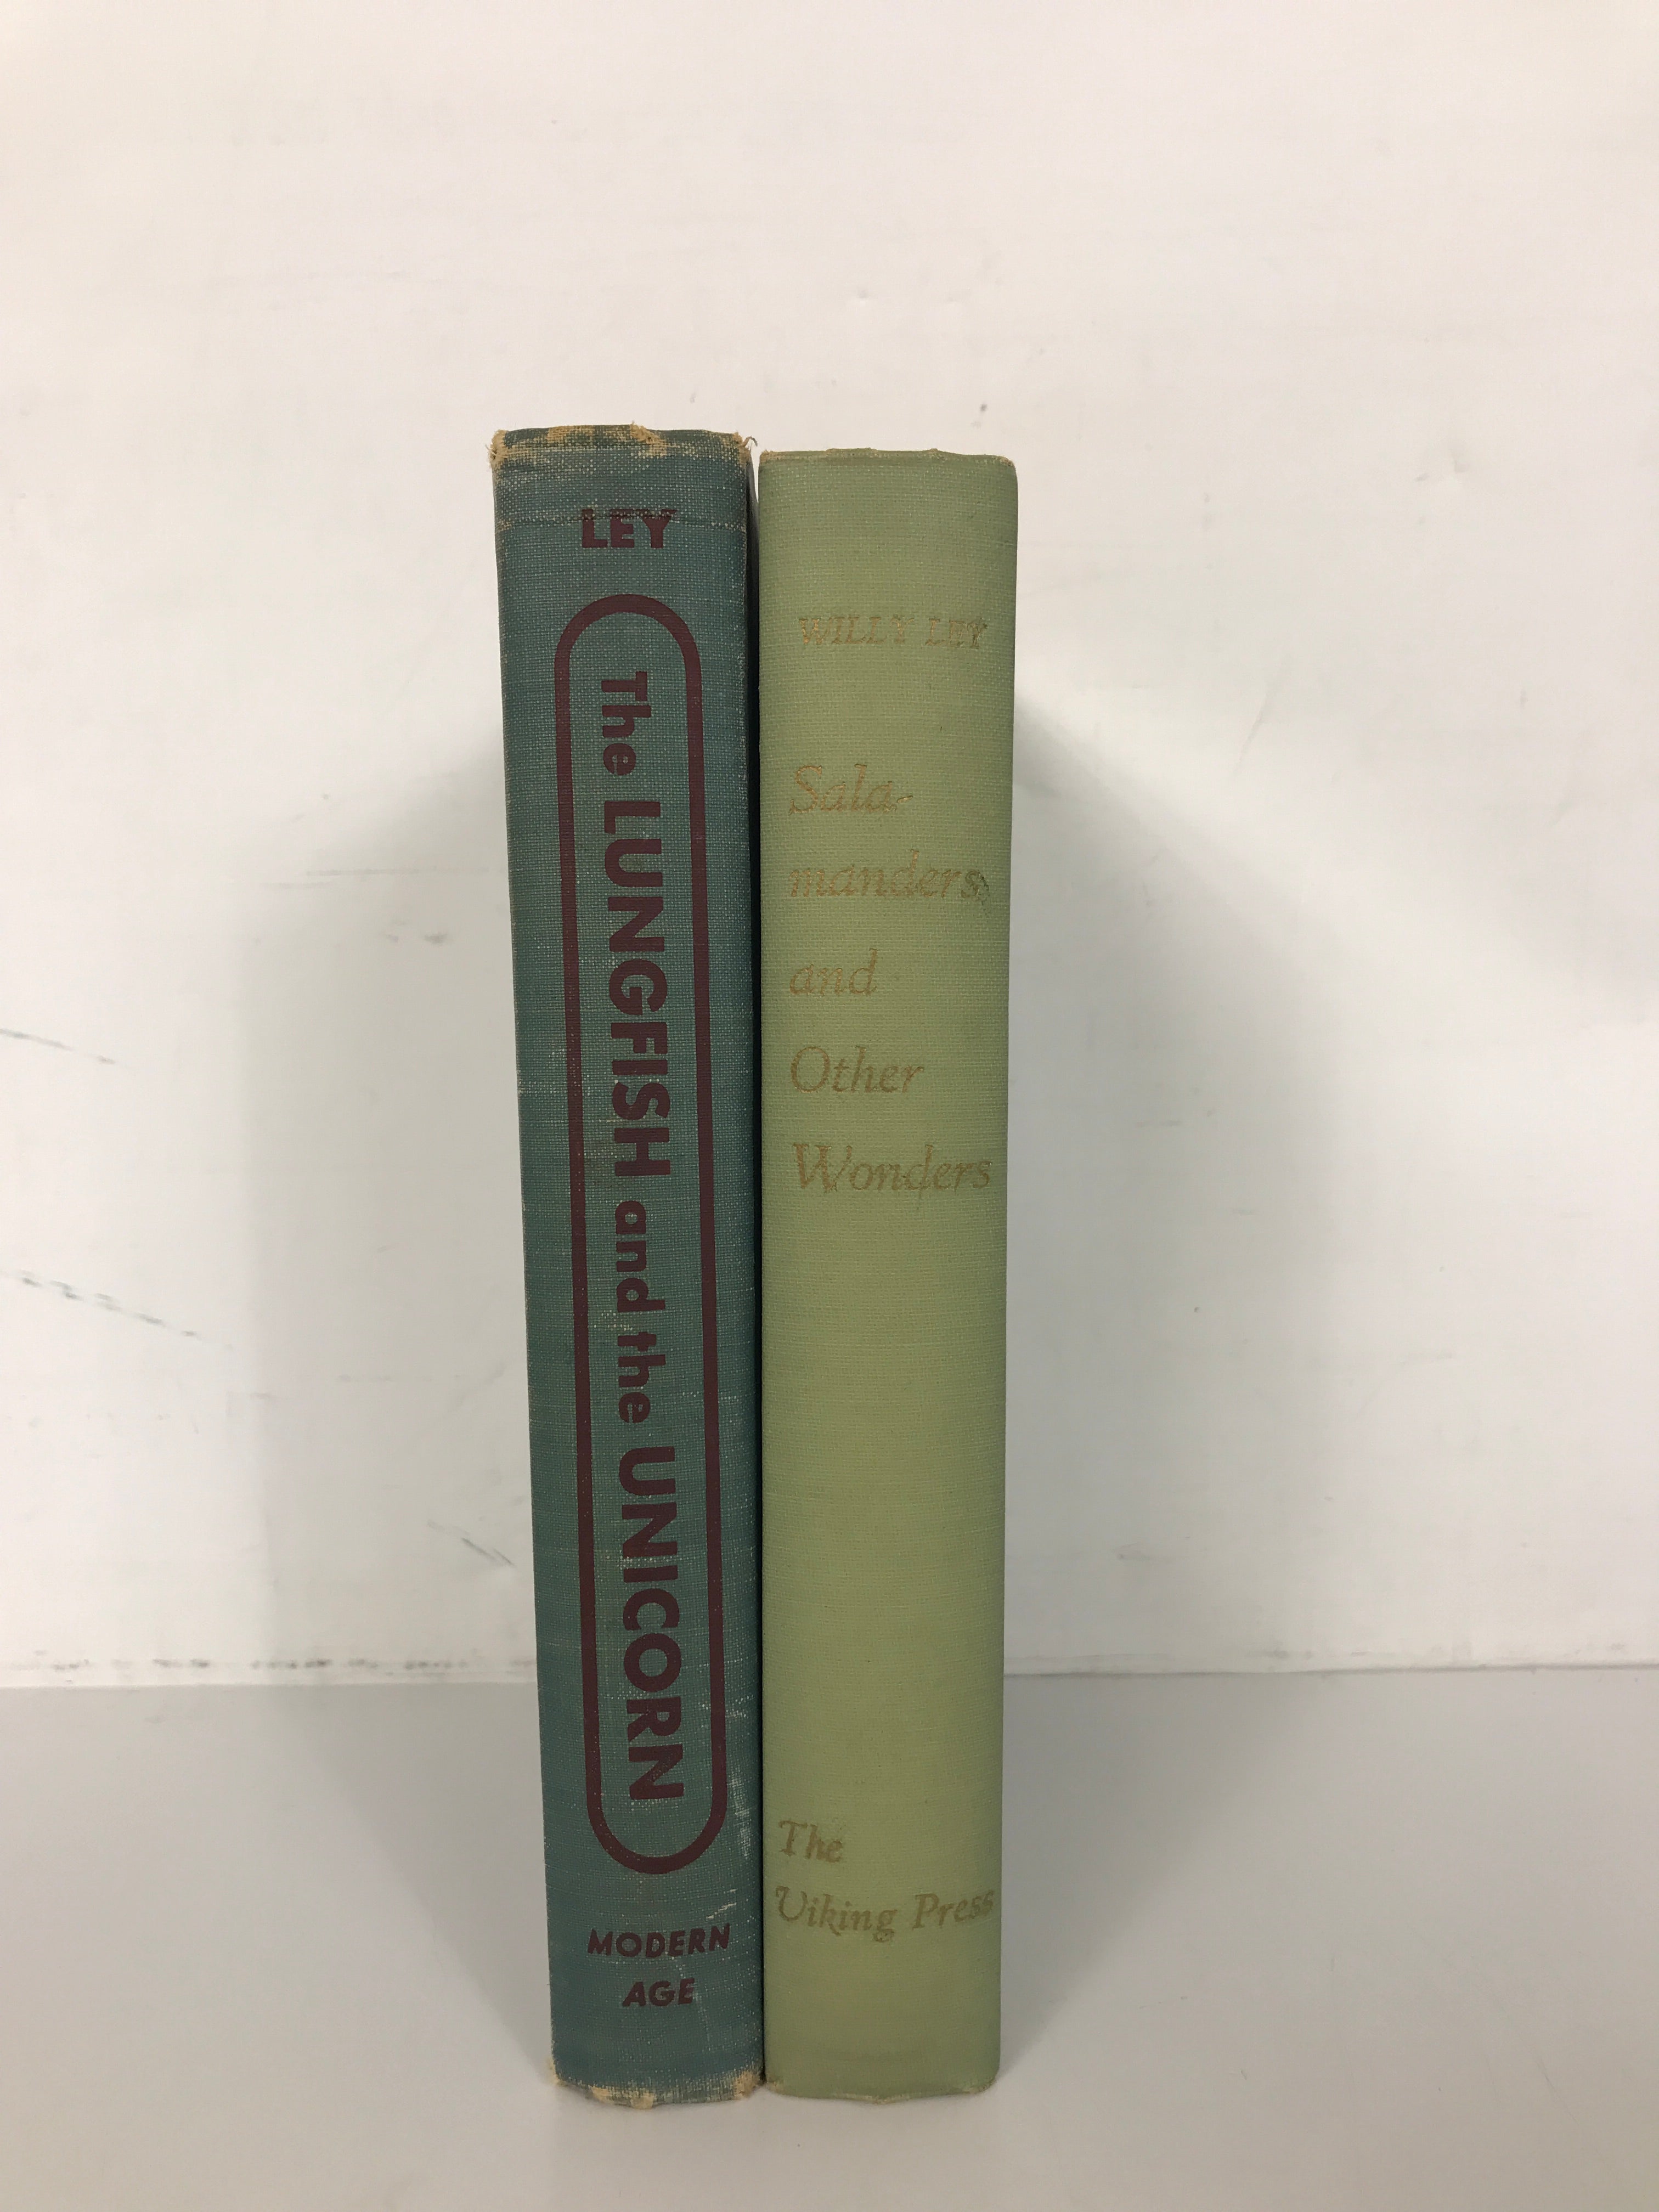 Lot of 2 Willy Ley: The Lungfish & the Unicorn/Salamanders & Other Wonders HC